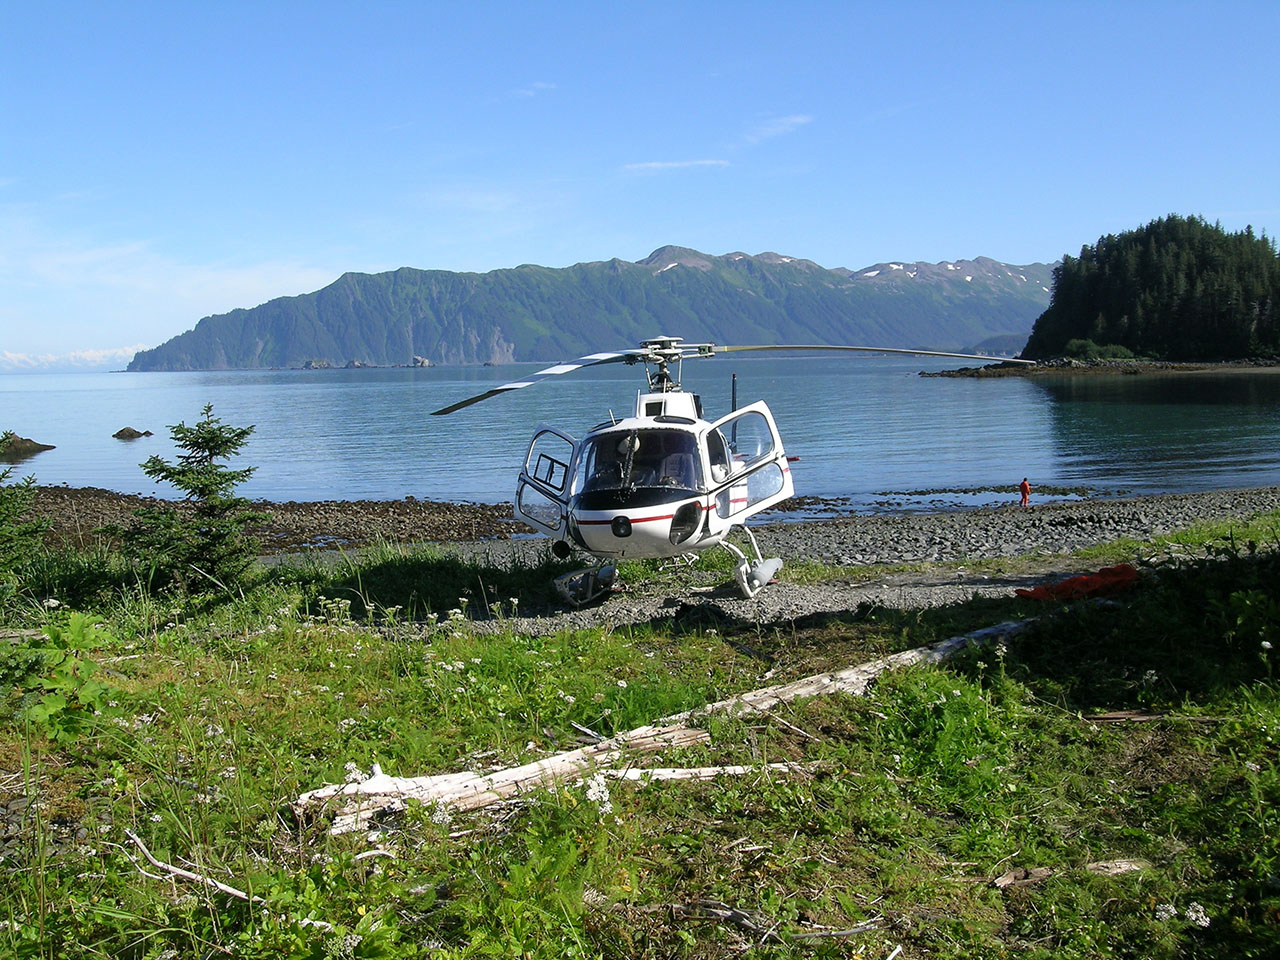 Helicopter on a shore.